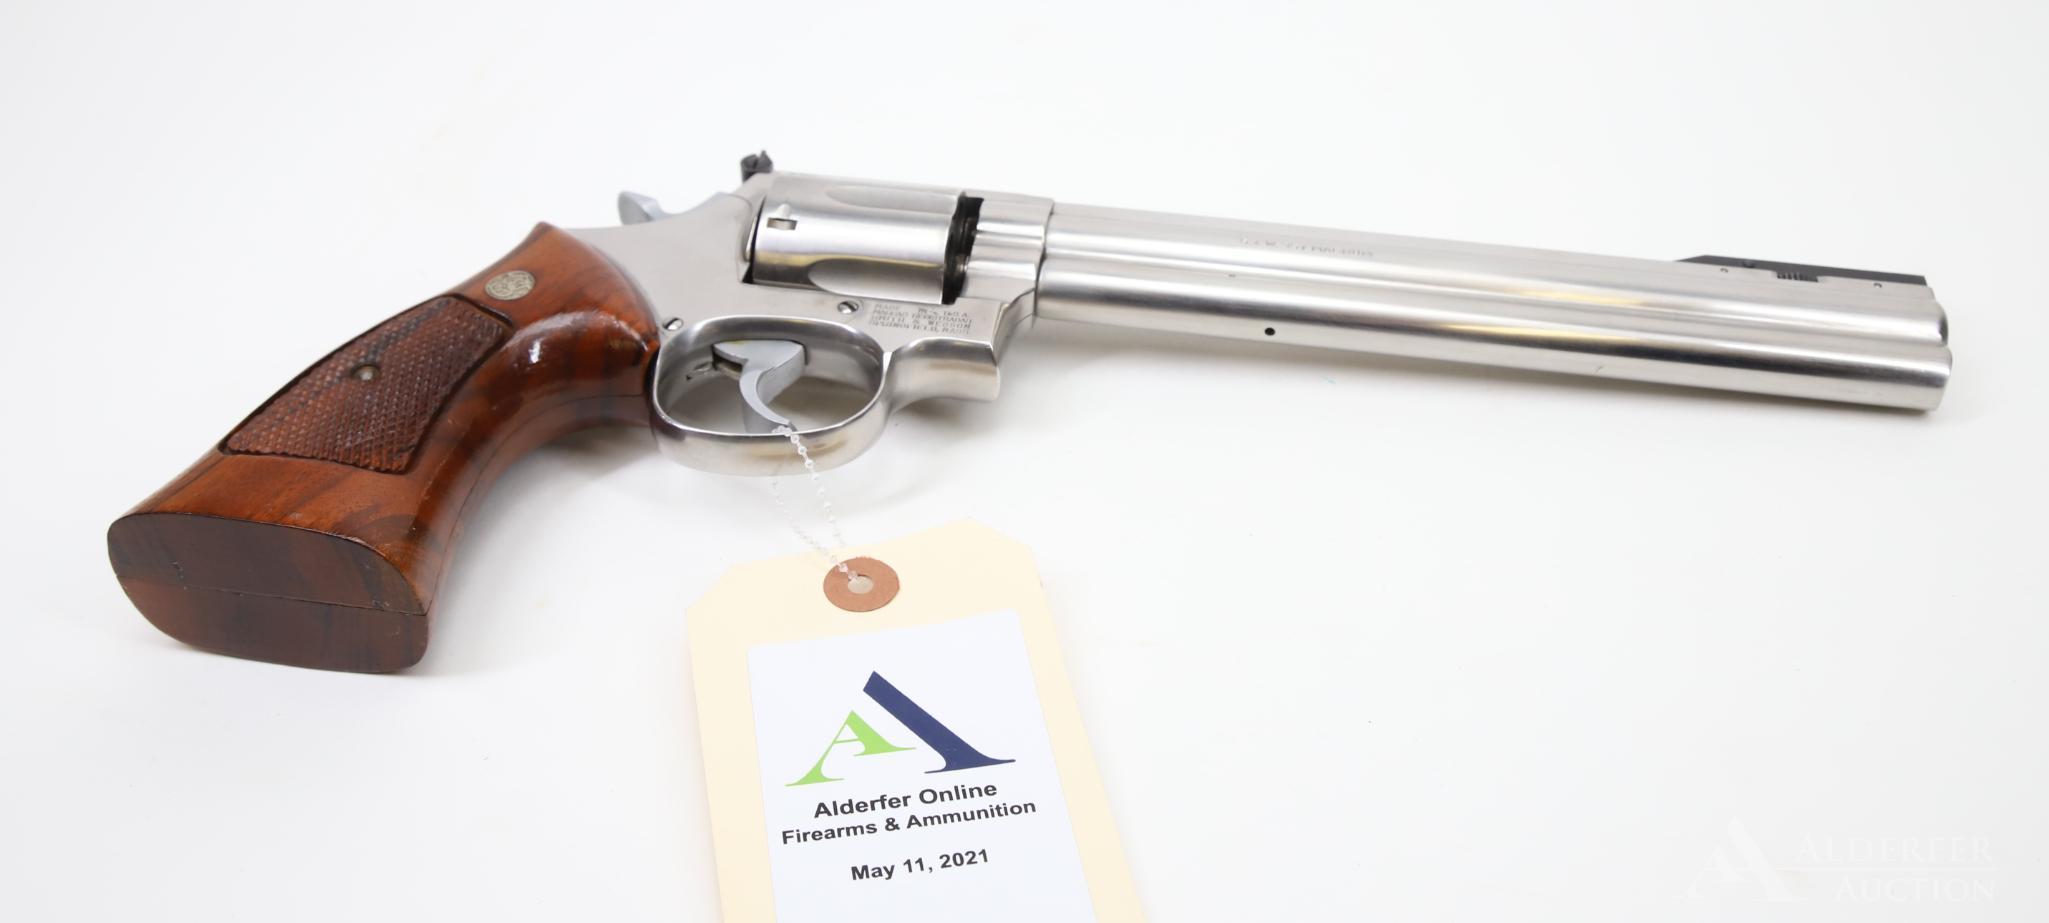 Smith And Wesson Model 686 Double Action Revolver